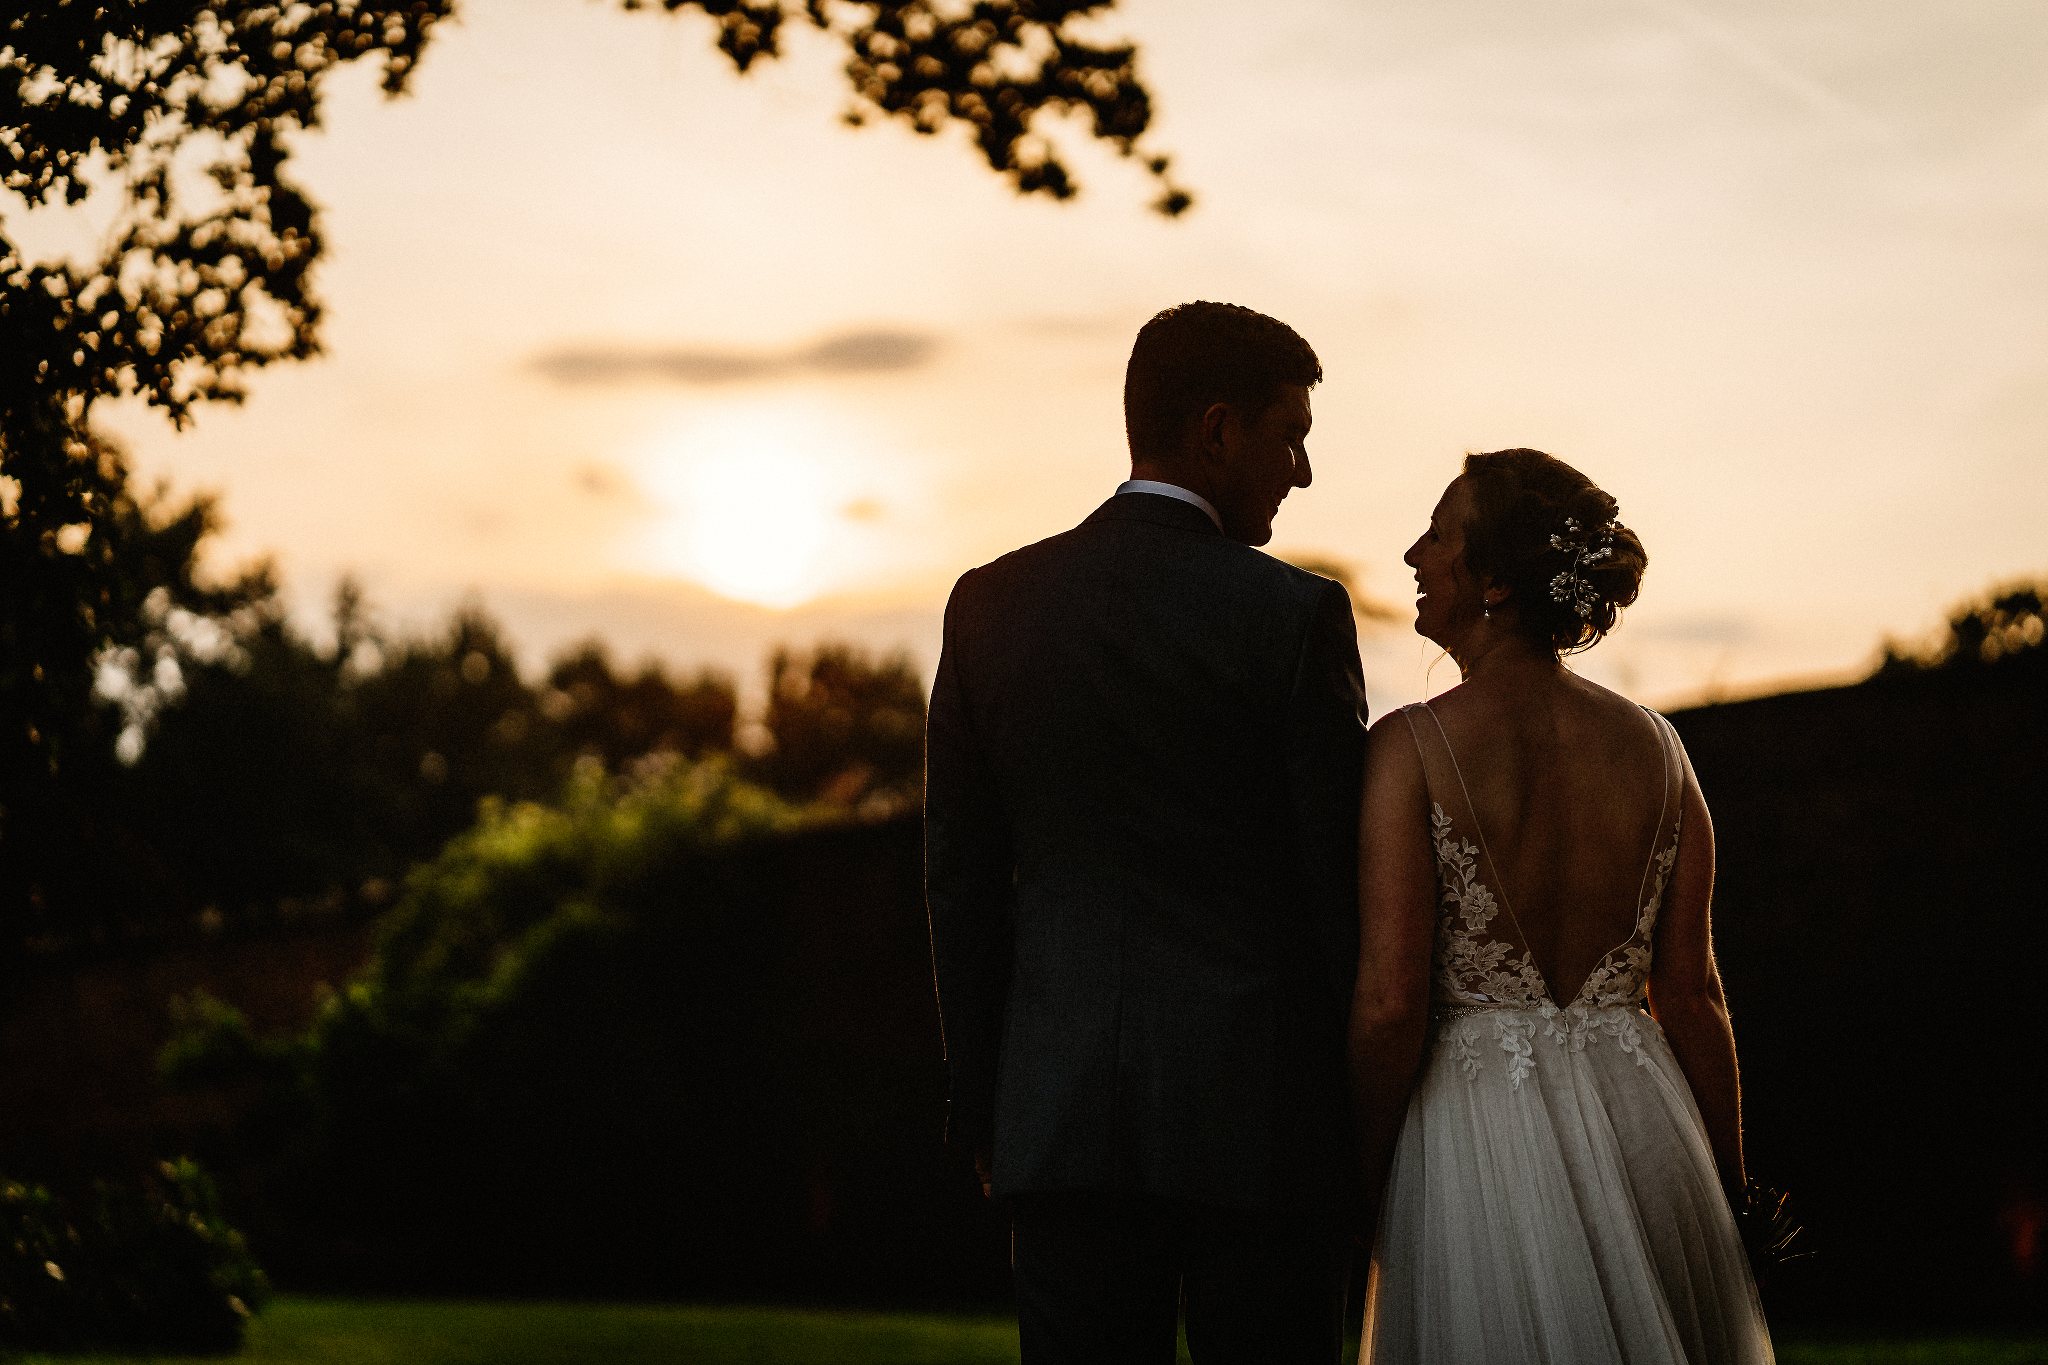 thorpe garden sunset with bride and groom